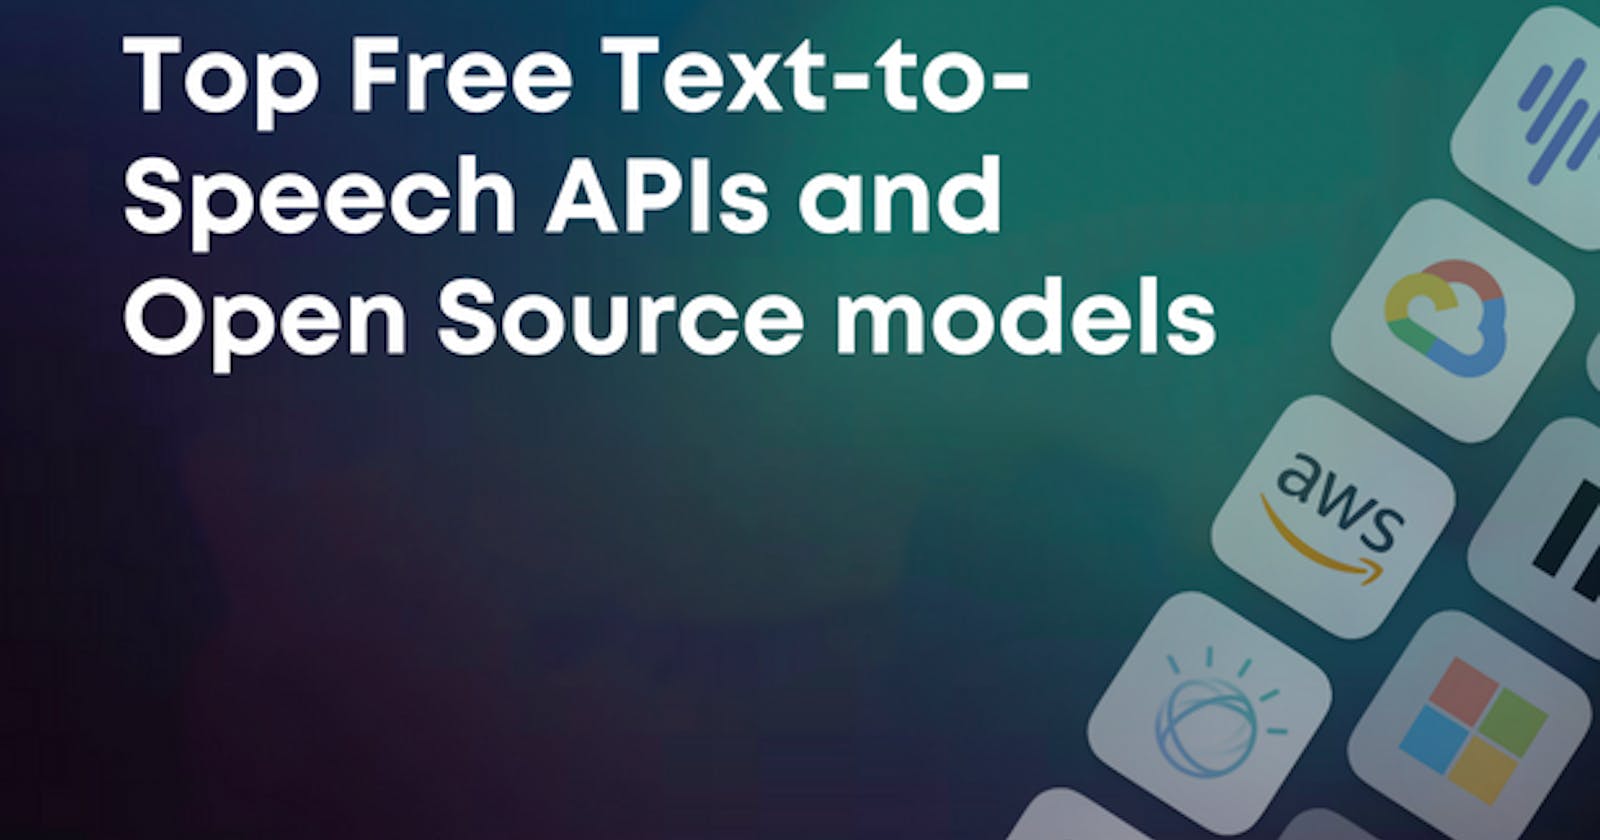 Top Free Text-to-Speech tools, APIs, and Open Source models